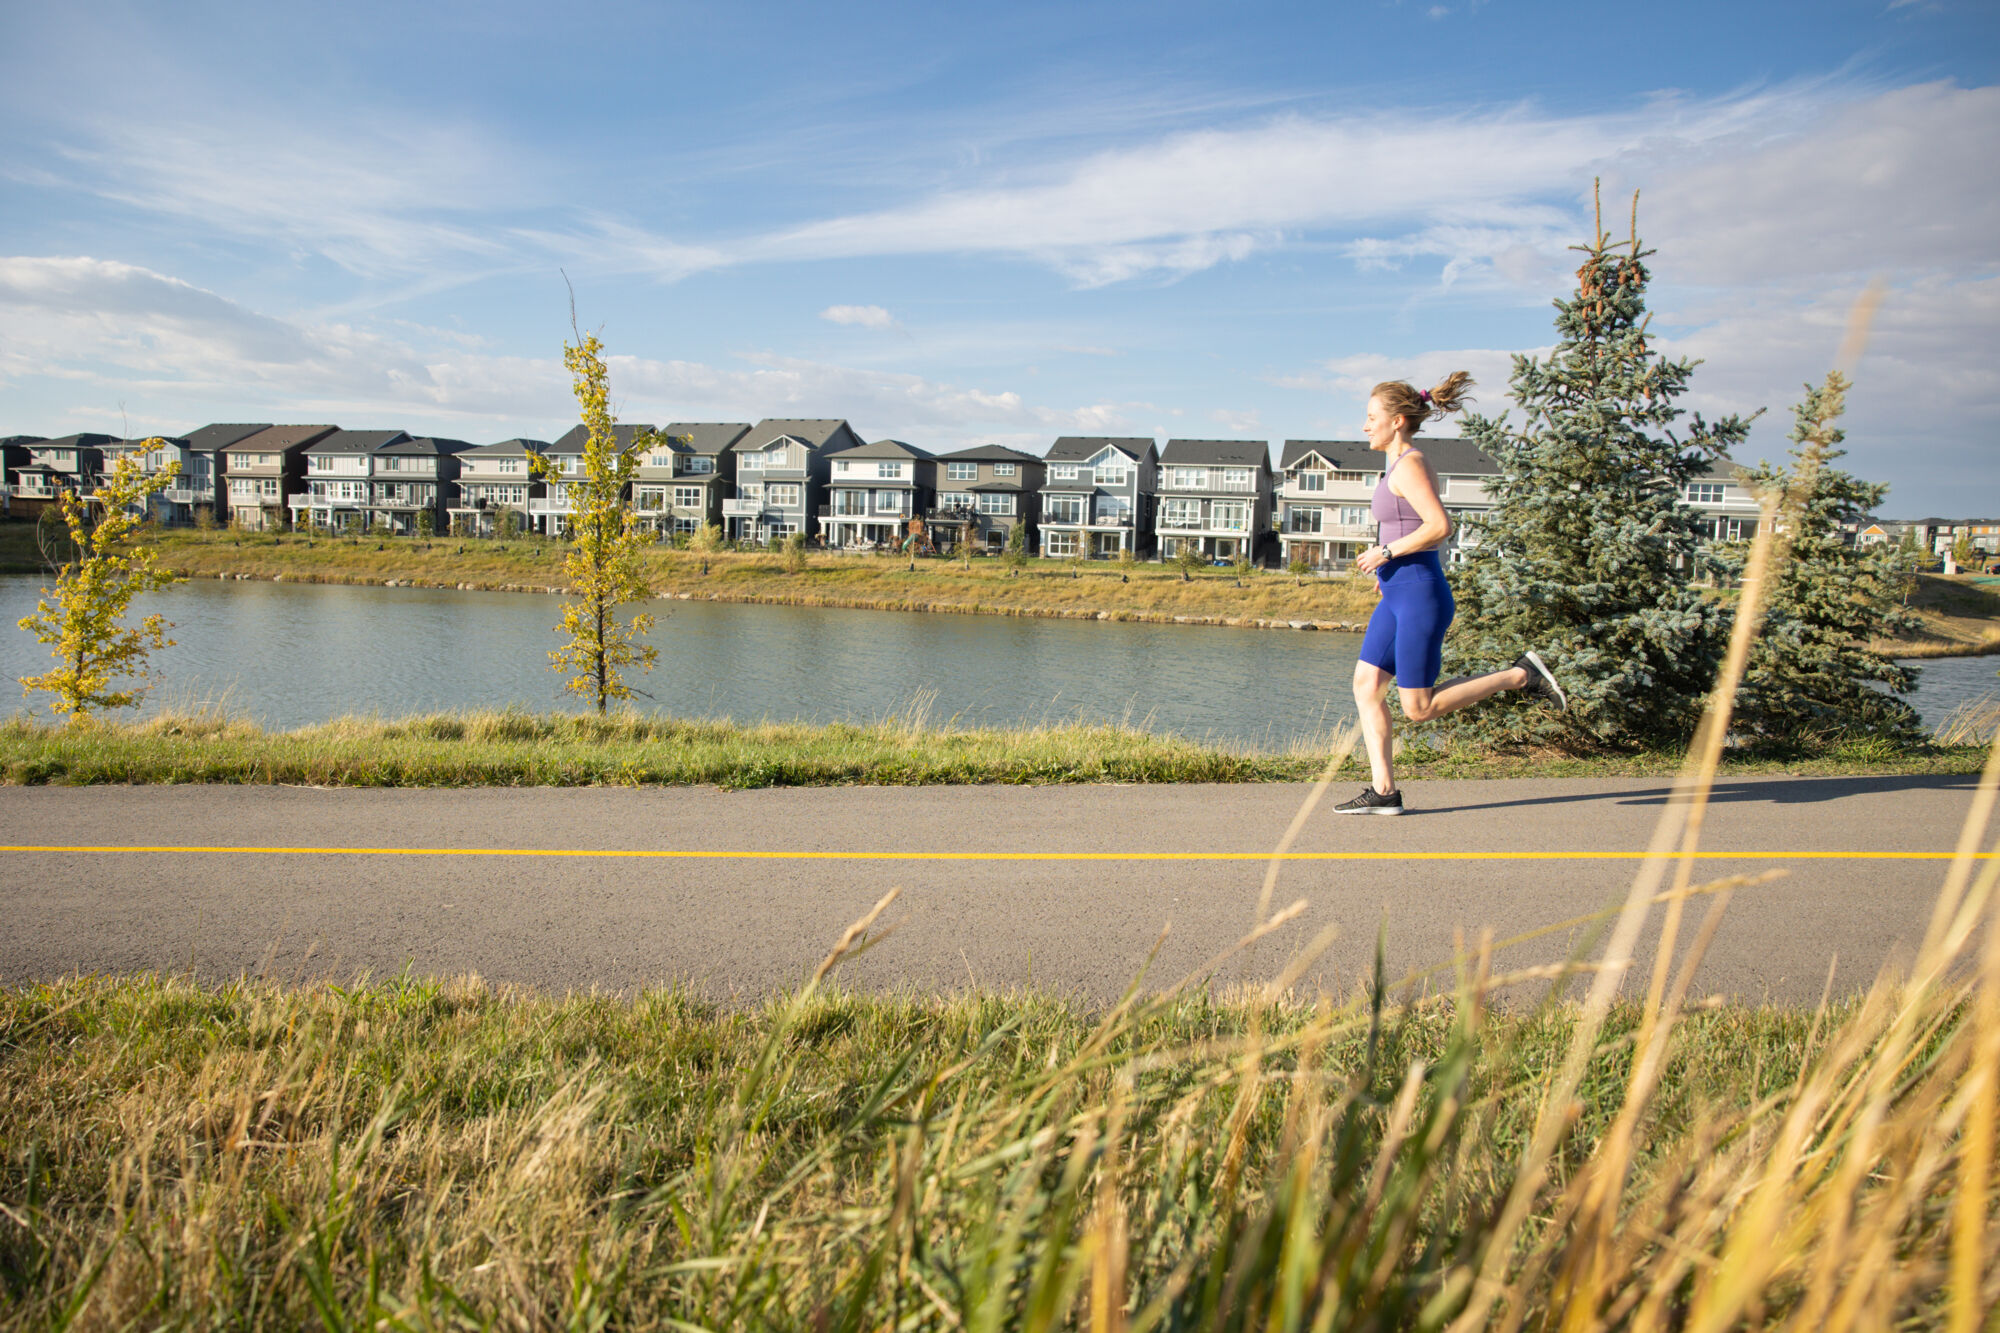 A woman jogging along side some trees along a pathway with a pond and a row of houses in the distance